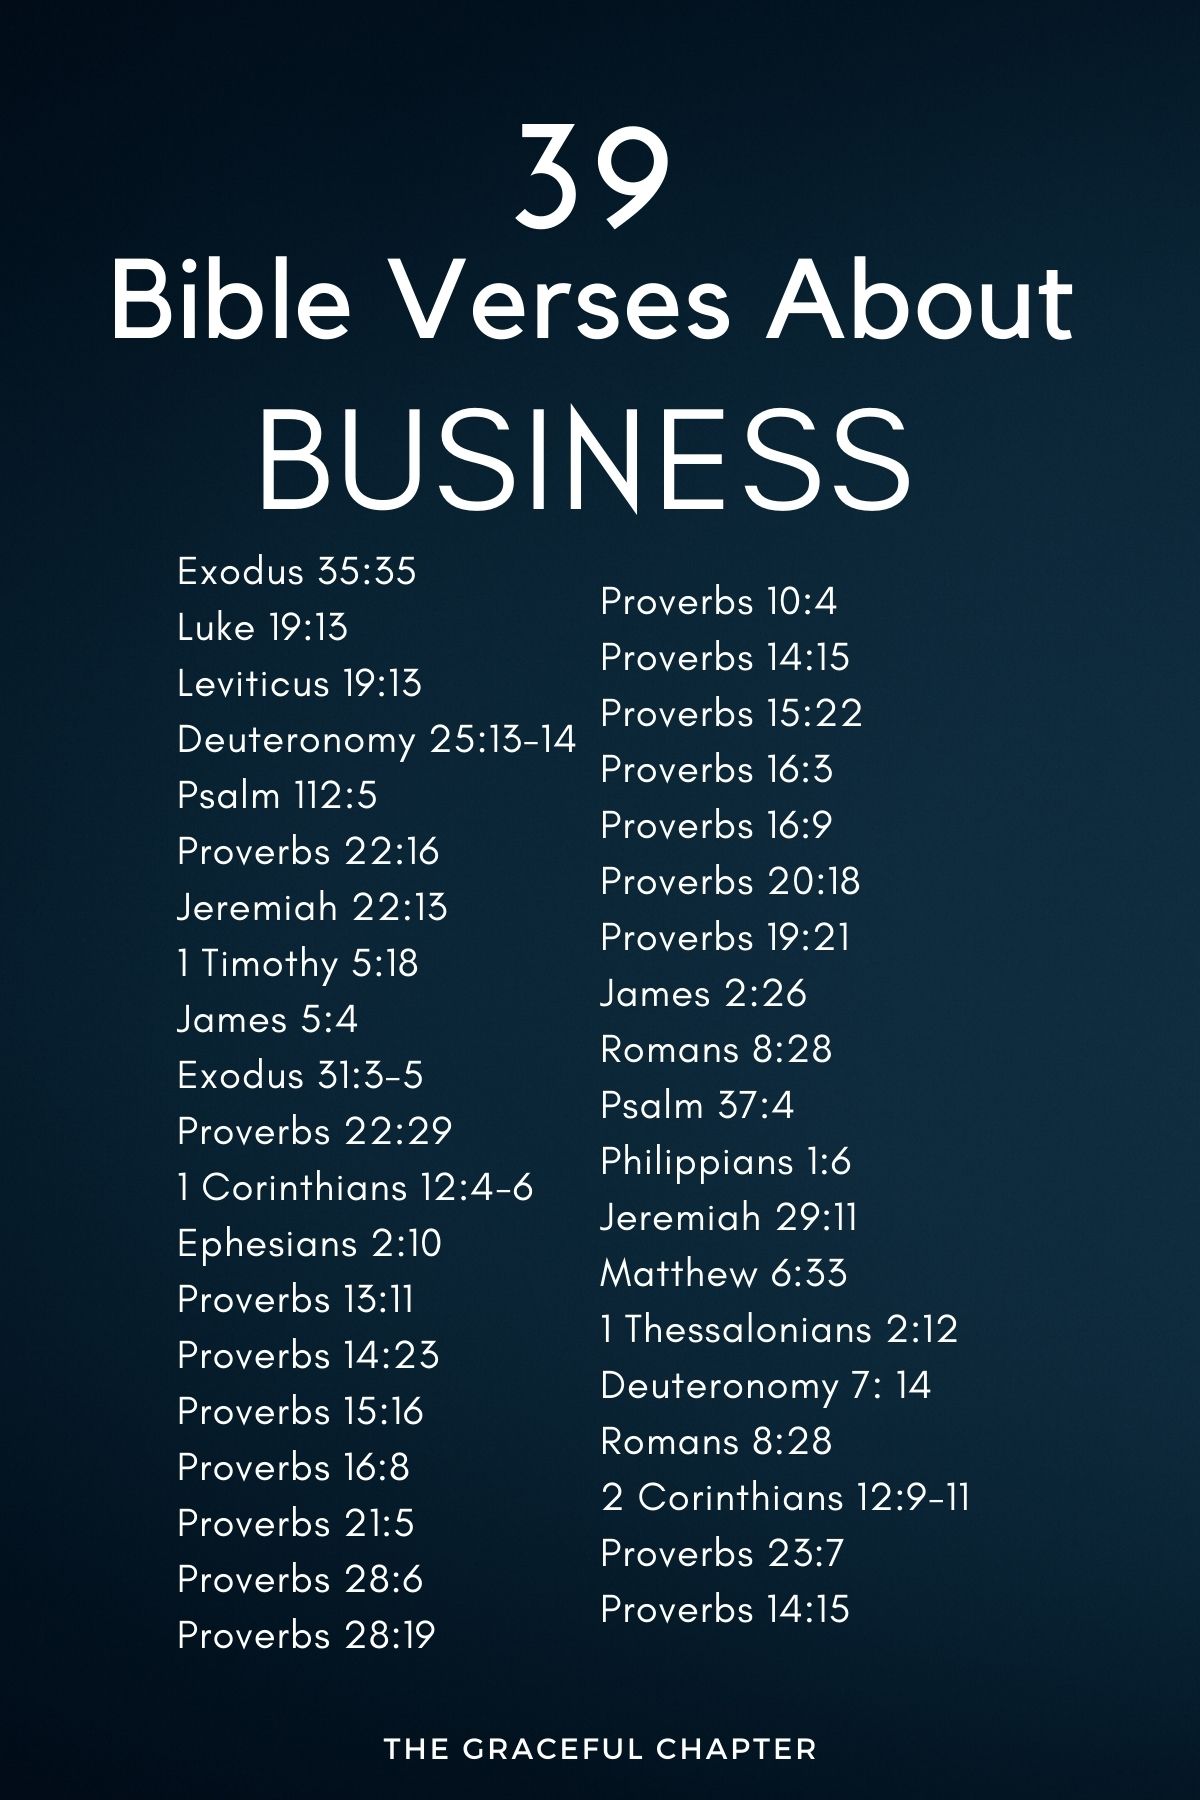 39 bible verses about business